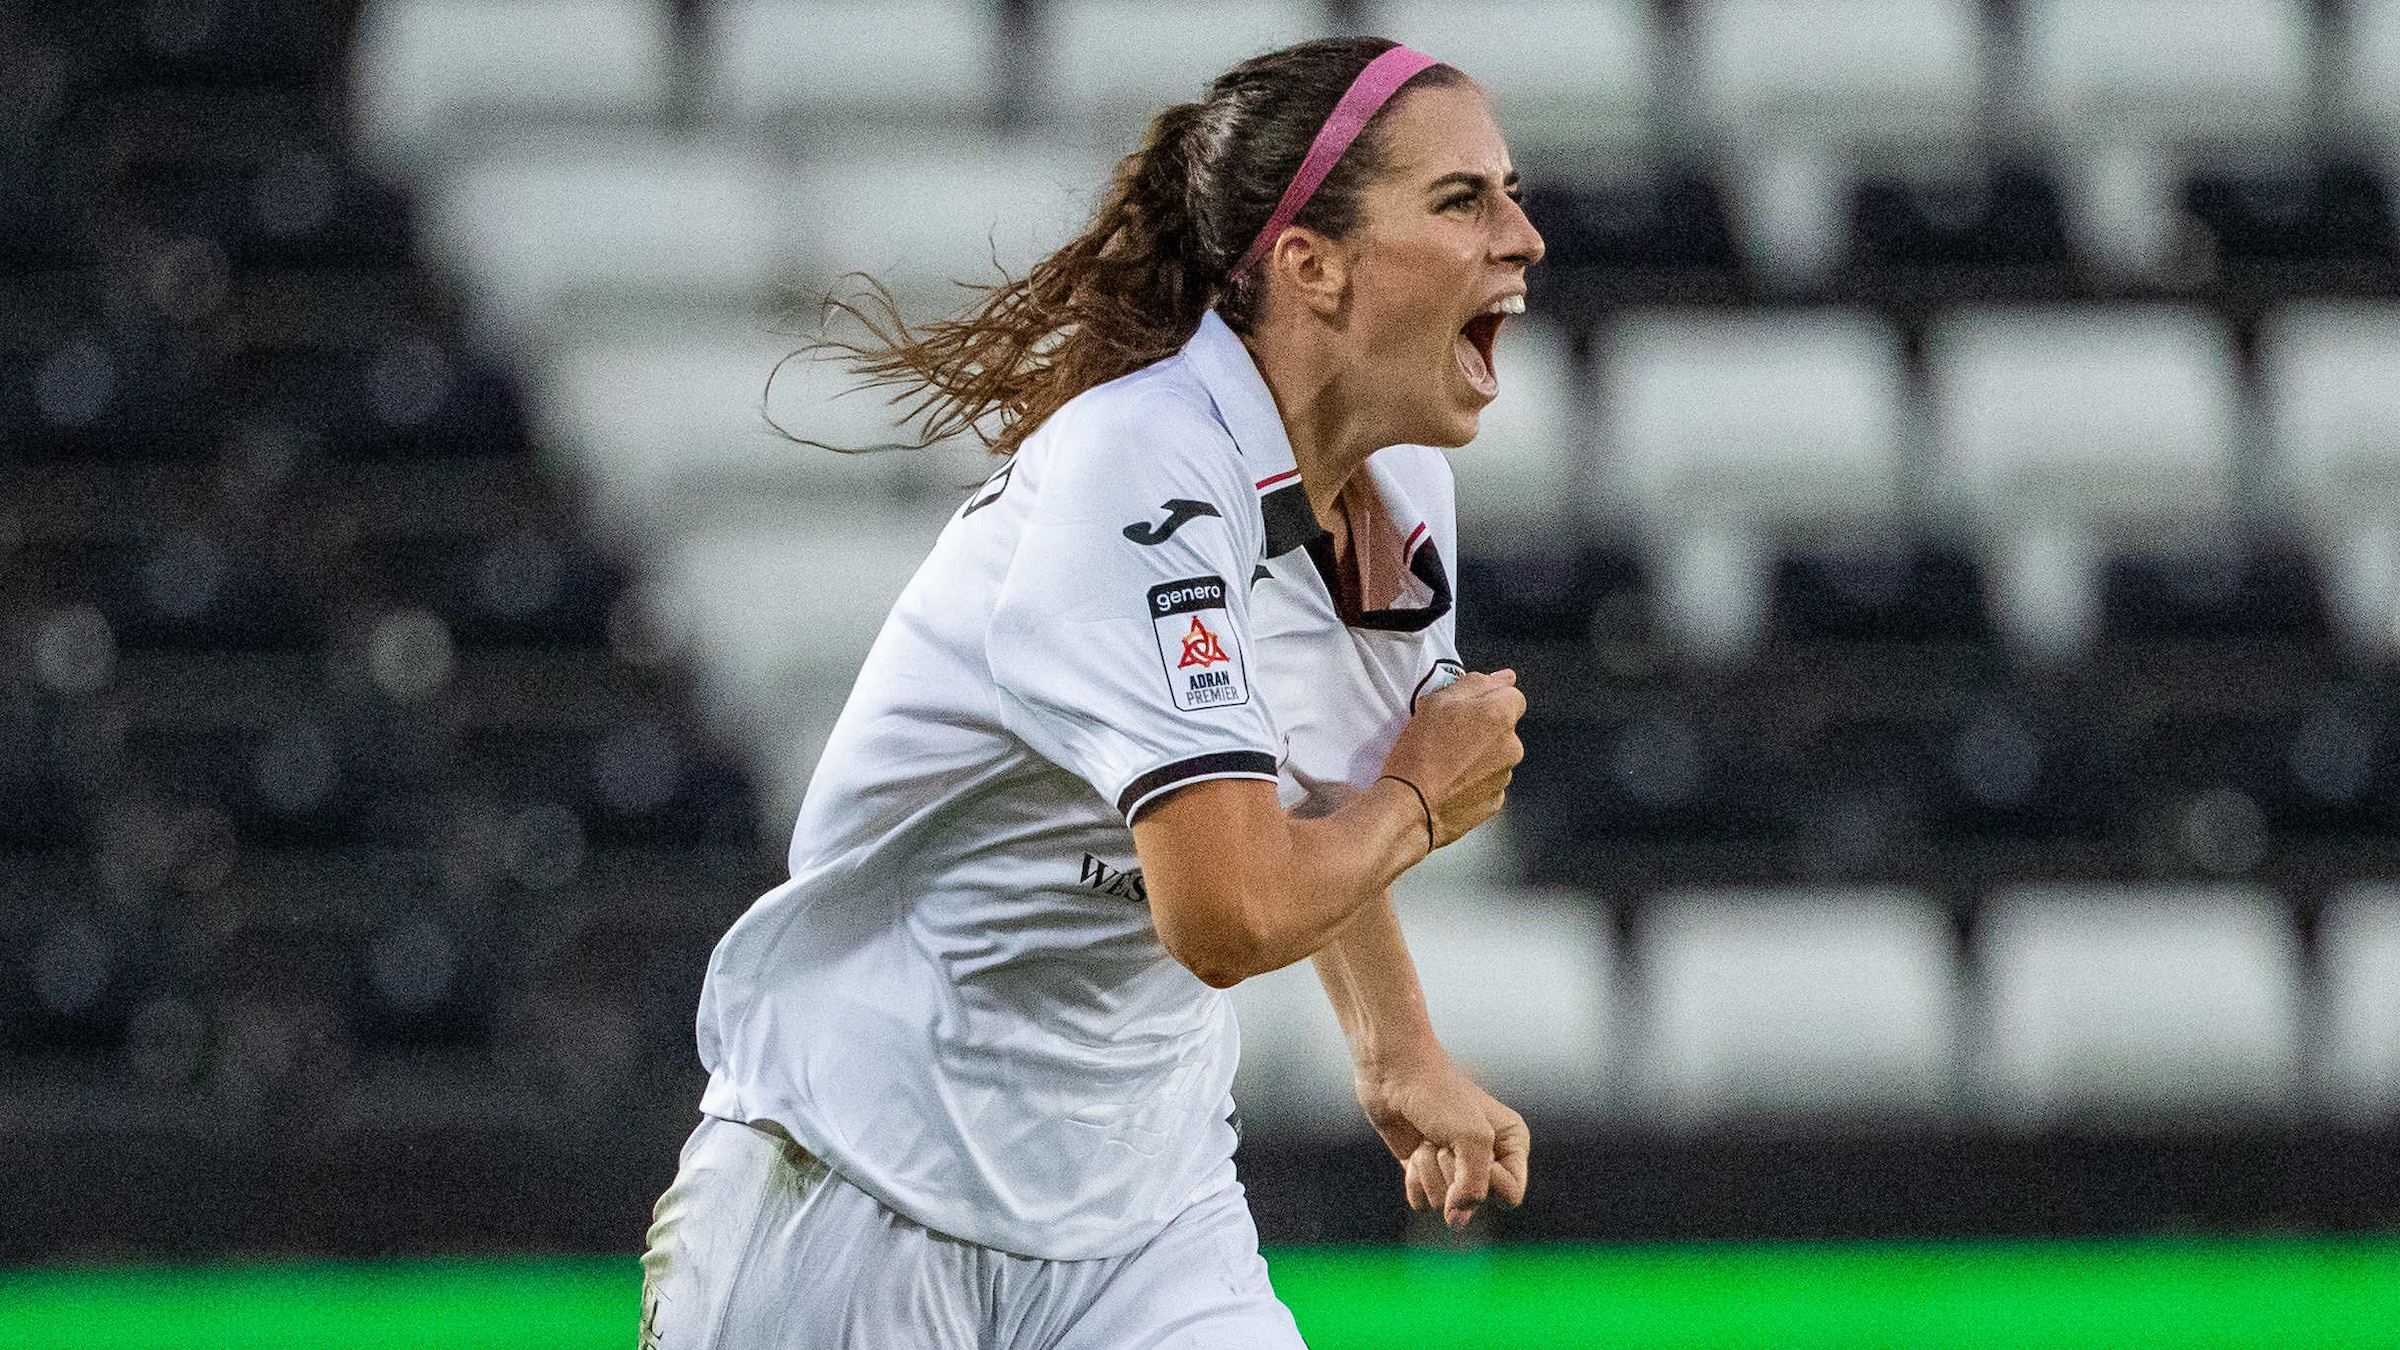 Katy Hosford celebrates by tapping the Swansea City badge on her shirt